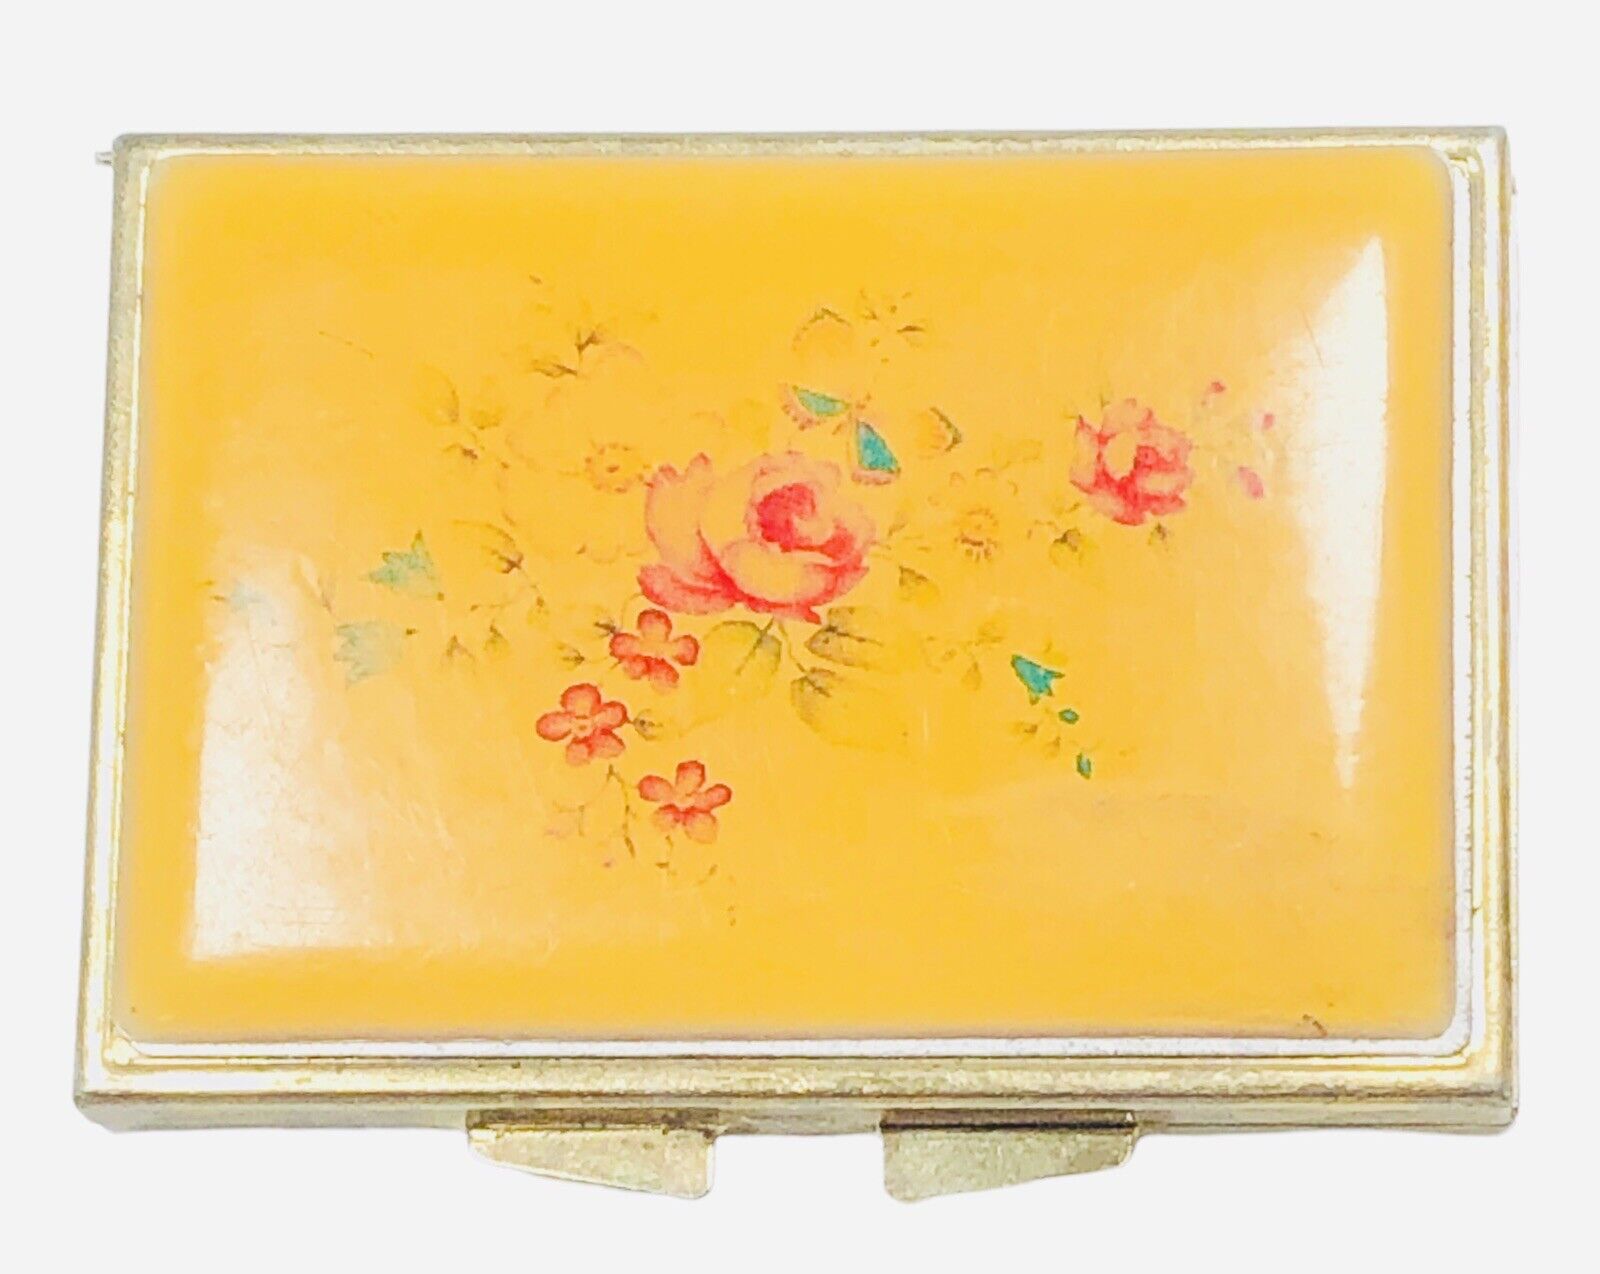 Ladies Vintage Yellow Floral Pill Compact with 5 Compartments #198 